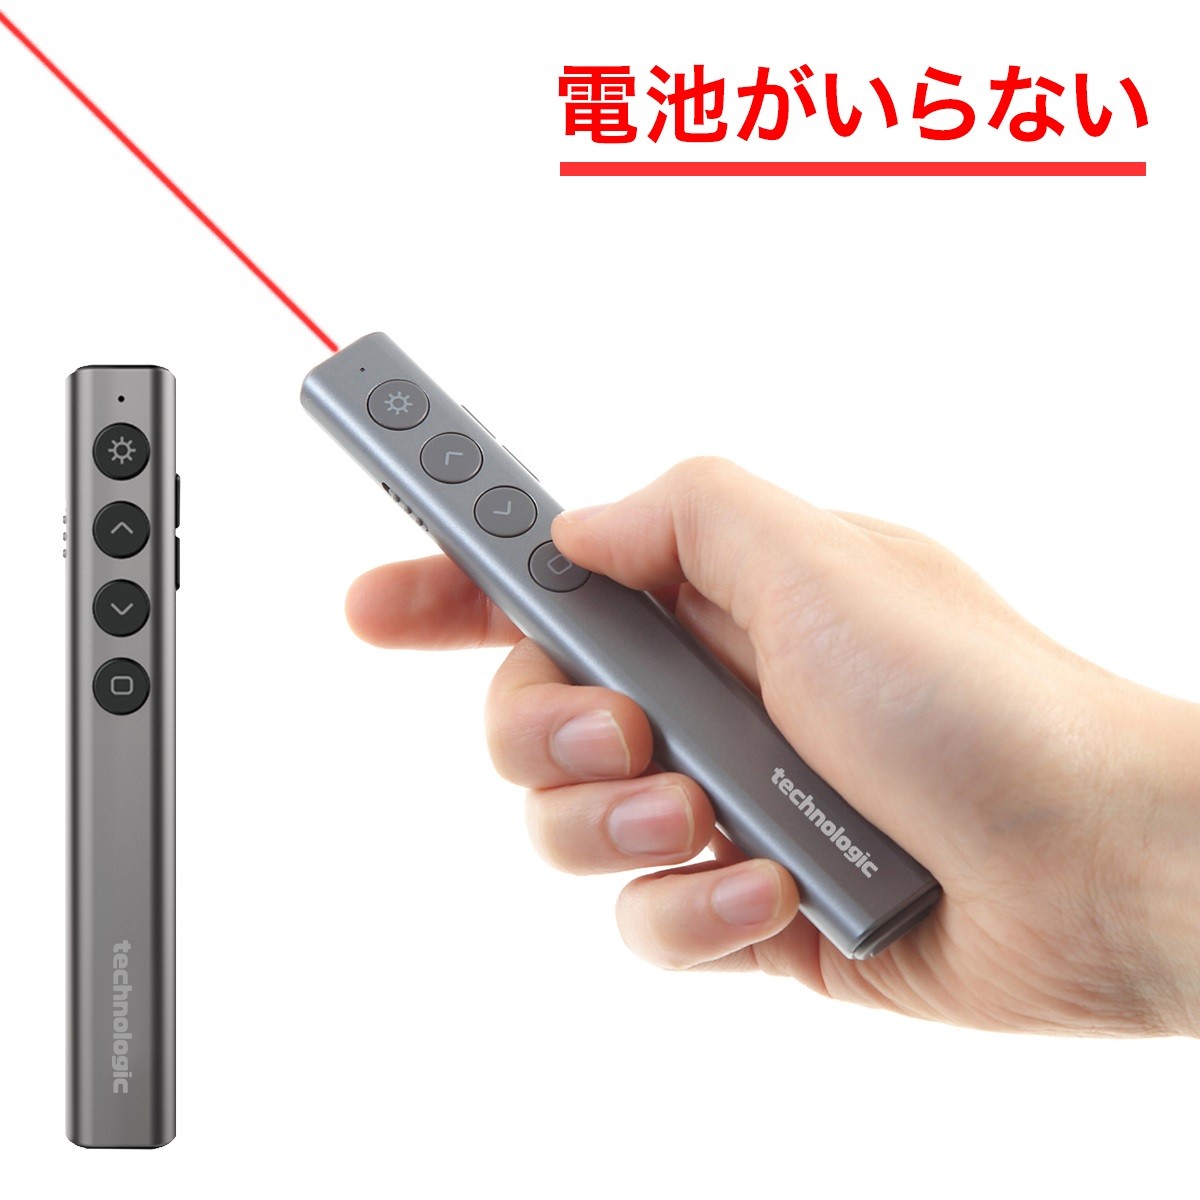  laser pointer Slim battery . not USB rechargeable powerful Laser pointer mouse power po remote control mac pre zenKeynote key Note bright 